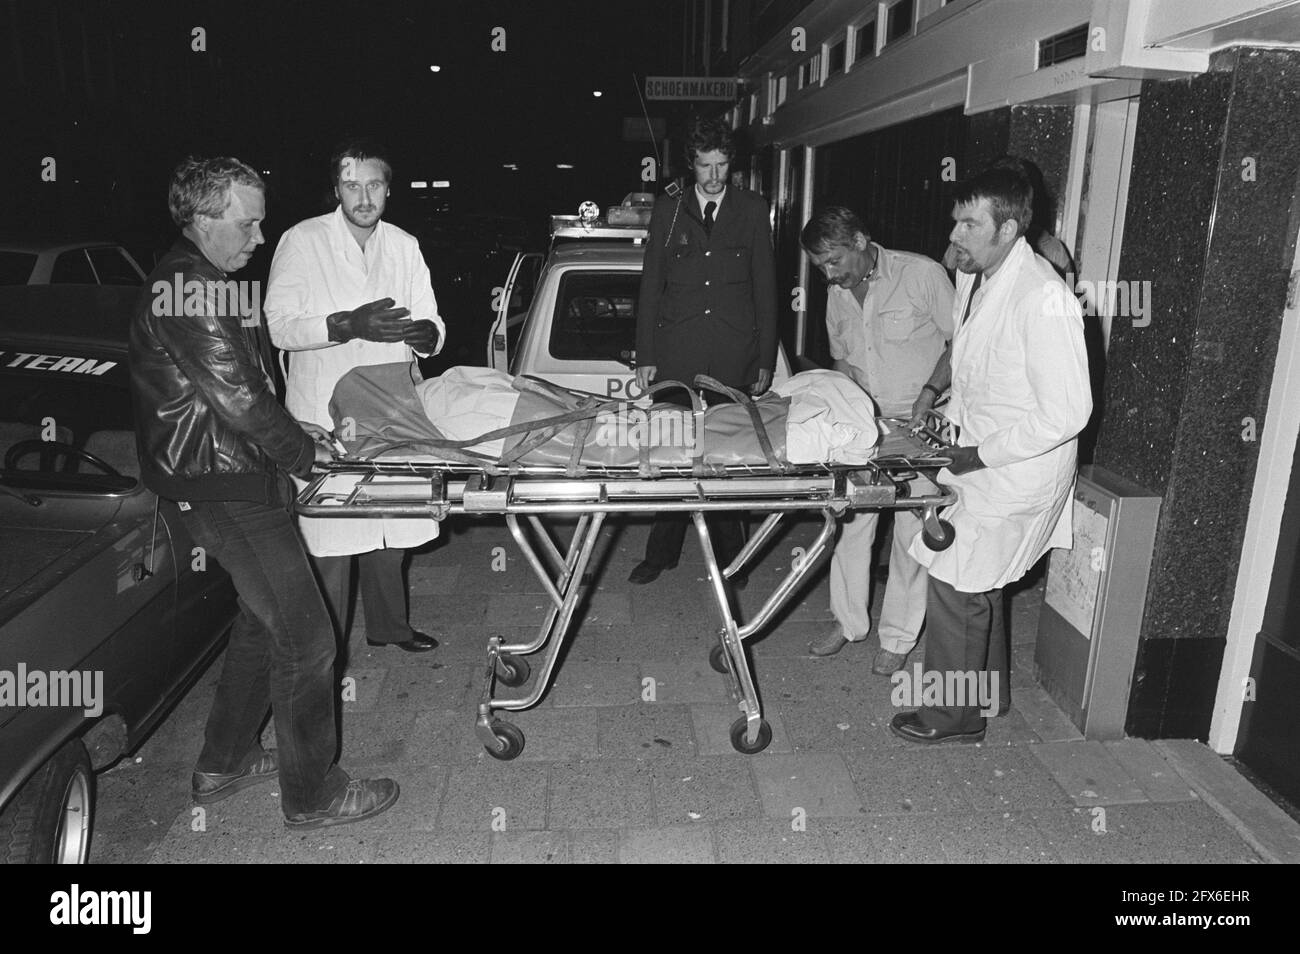 The remains of the approximately 30-year-old man murdered in Amsterdam's Lootstraat is carried away by ambulance personnel, August 31, 1981, ambulances, emergency services, corpses, murders, The Netherlands, 20th century press agency photo, news to remember, documentary, historic photography 1945-1990, visual stories, human history of the Twentieth Century, capturing moments in time Stock Photo